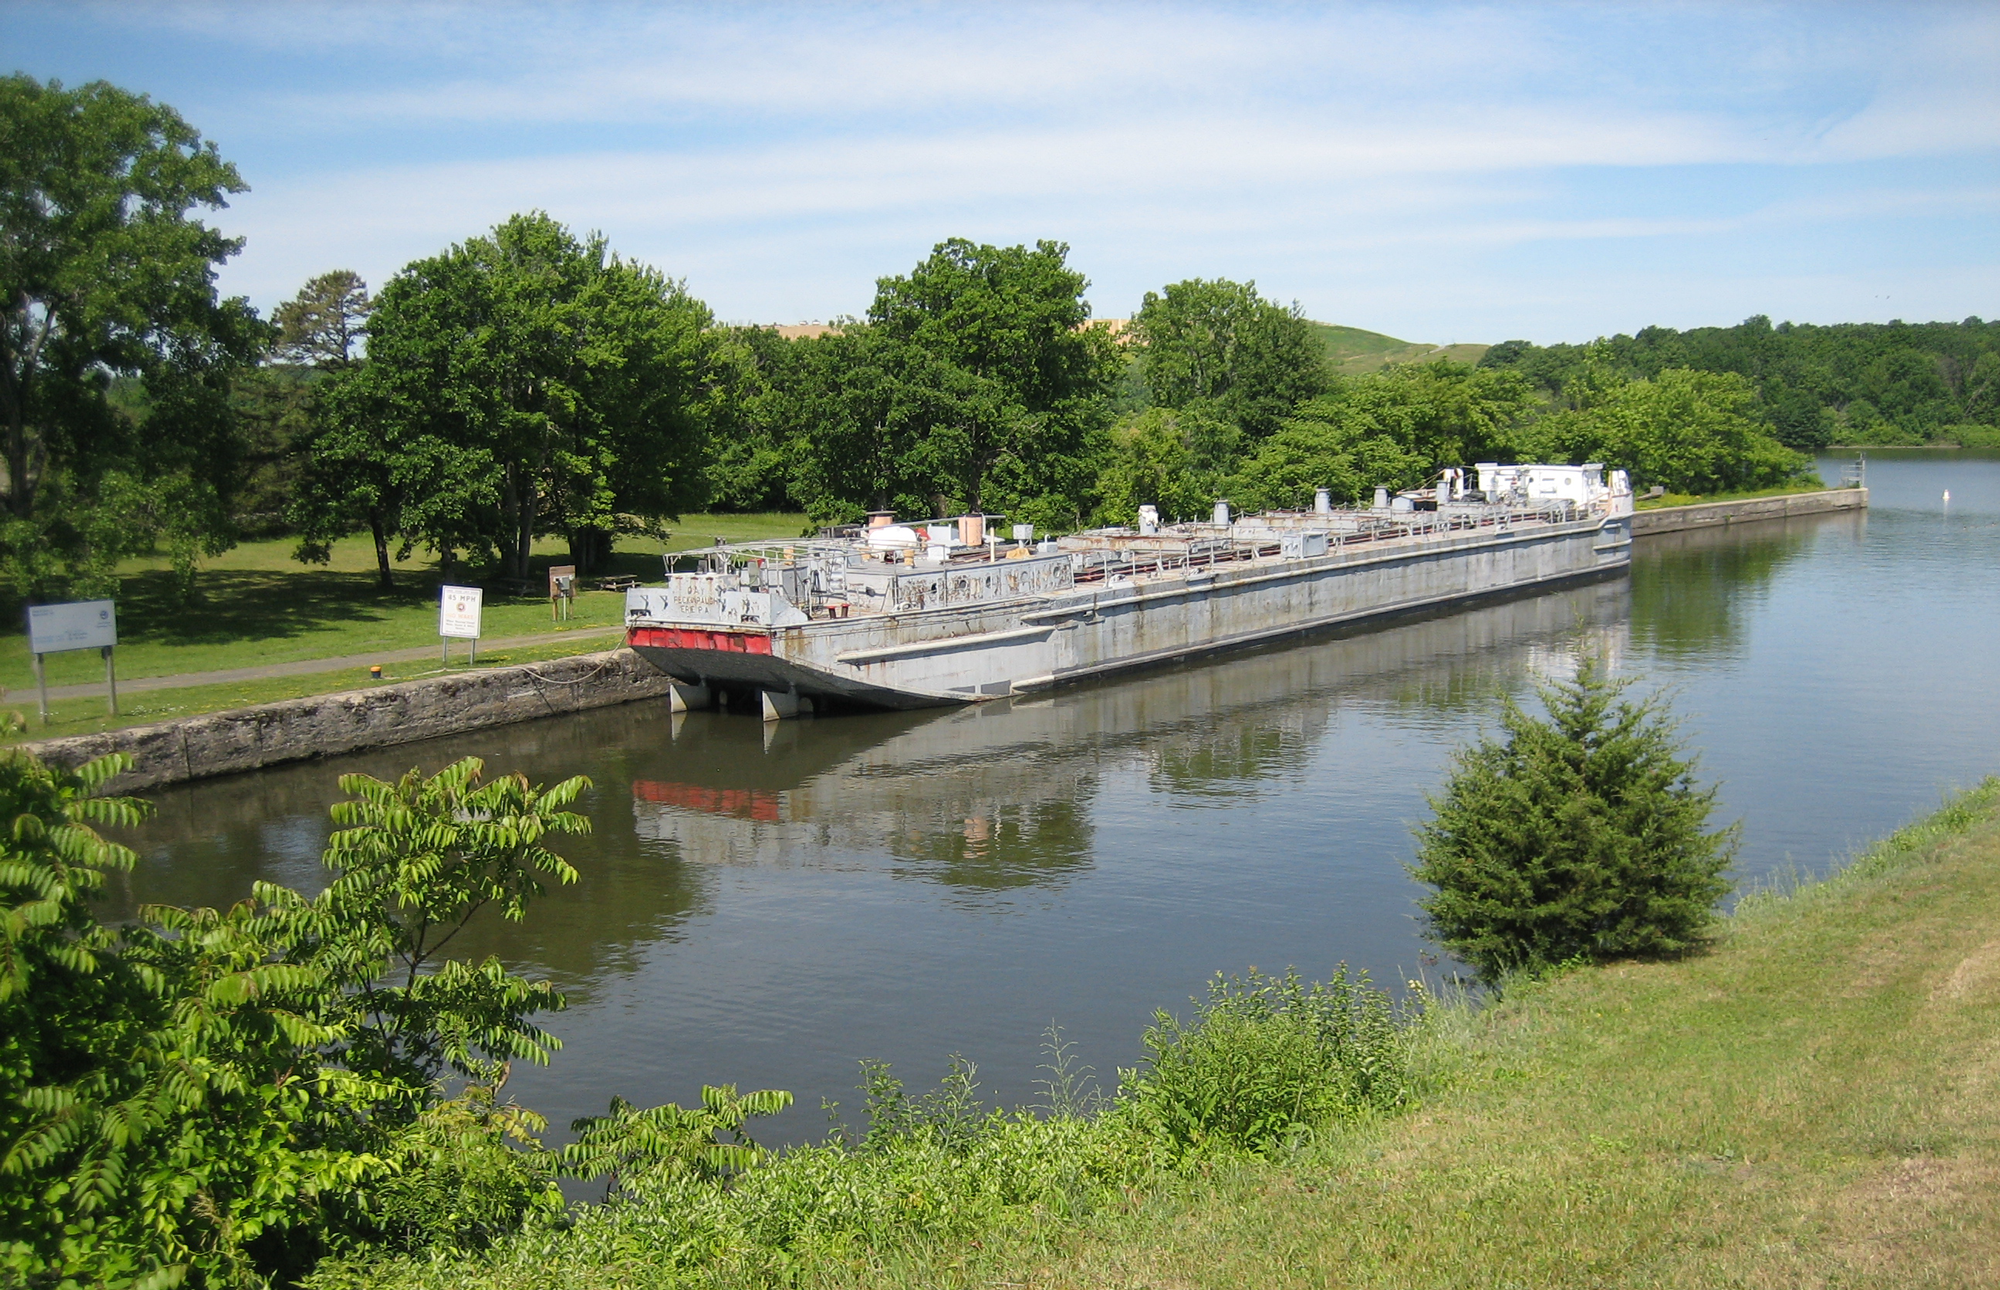 More Photos from the Barge Canal